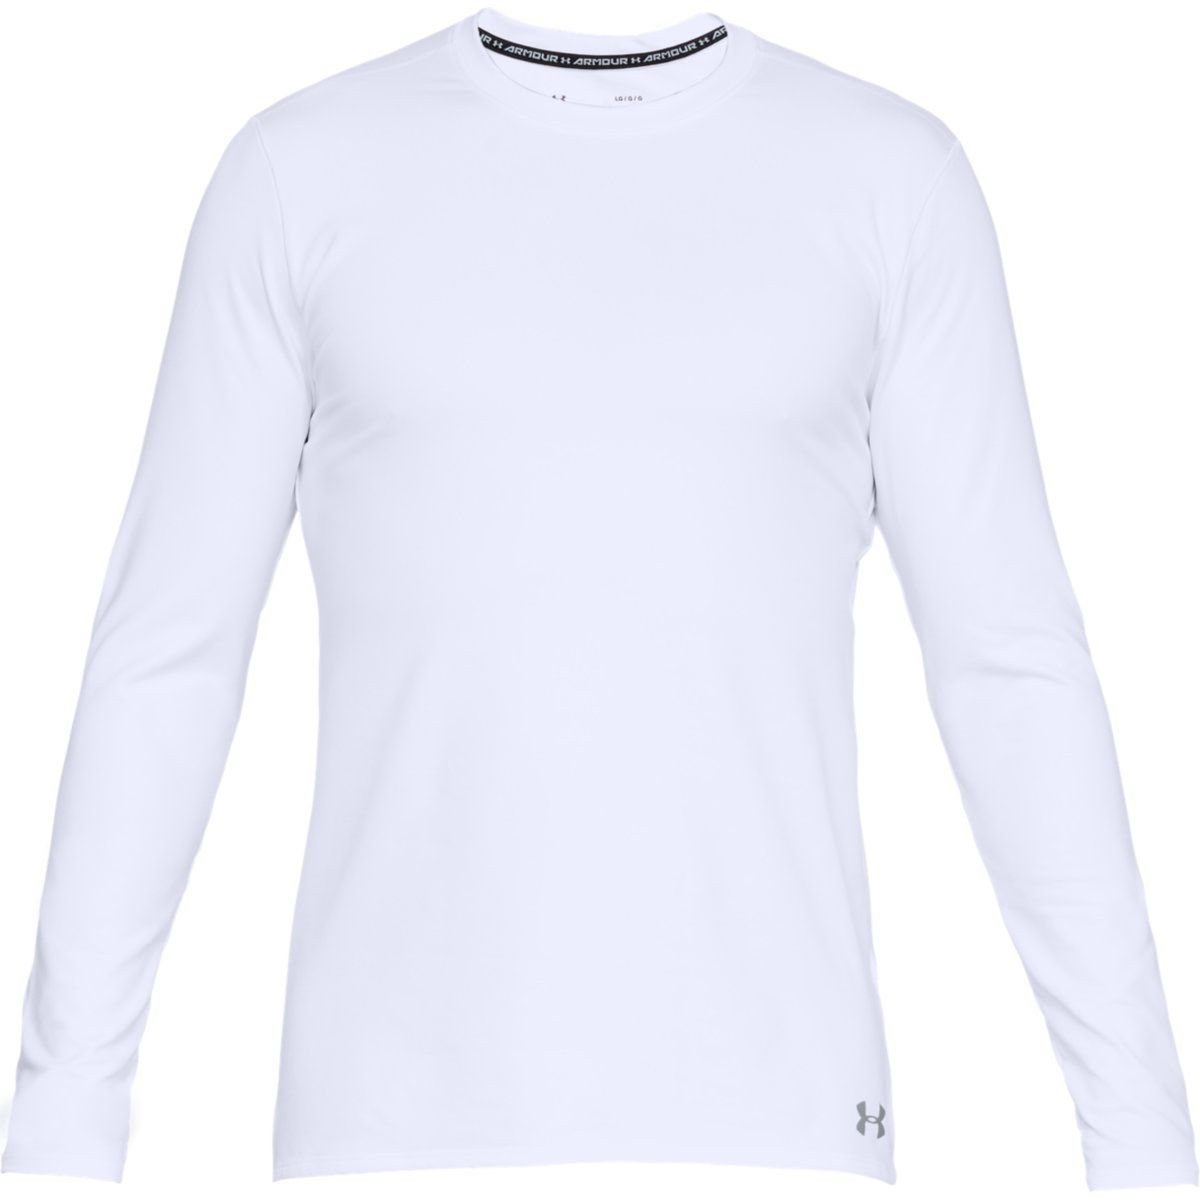 Vêtements thermiques Under Armour Fitted CG Crew Blanc S